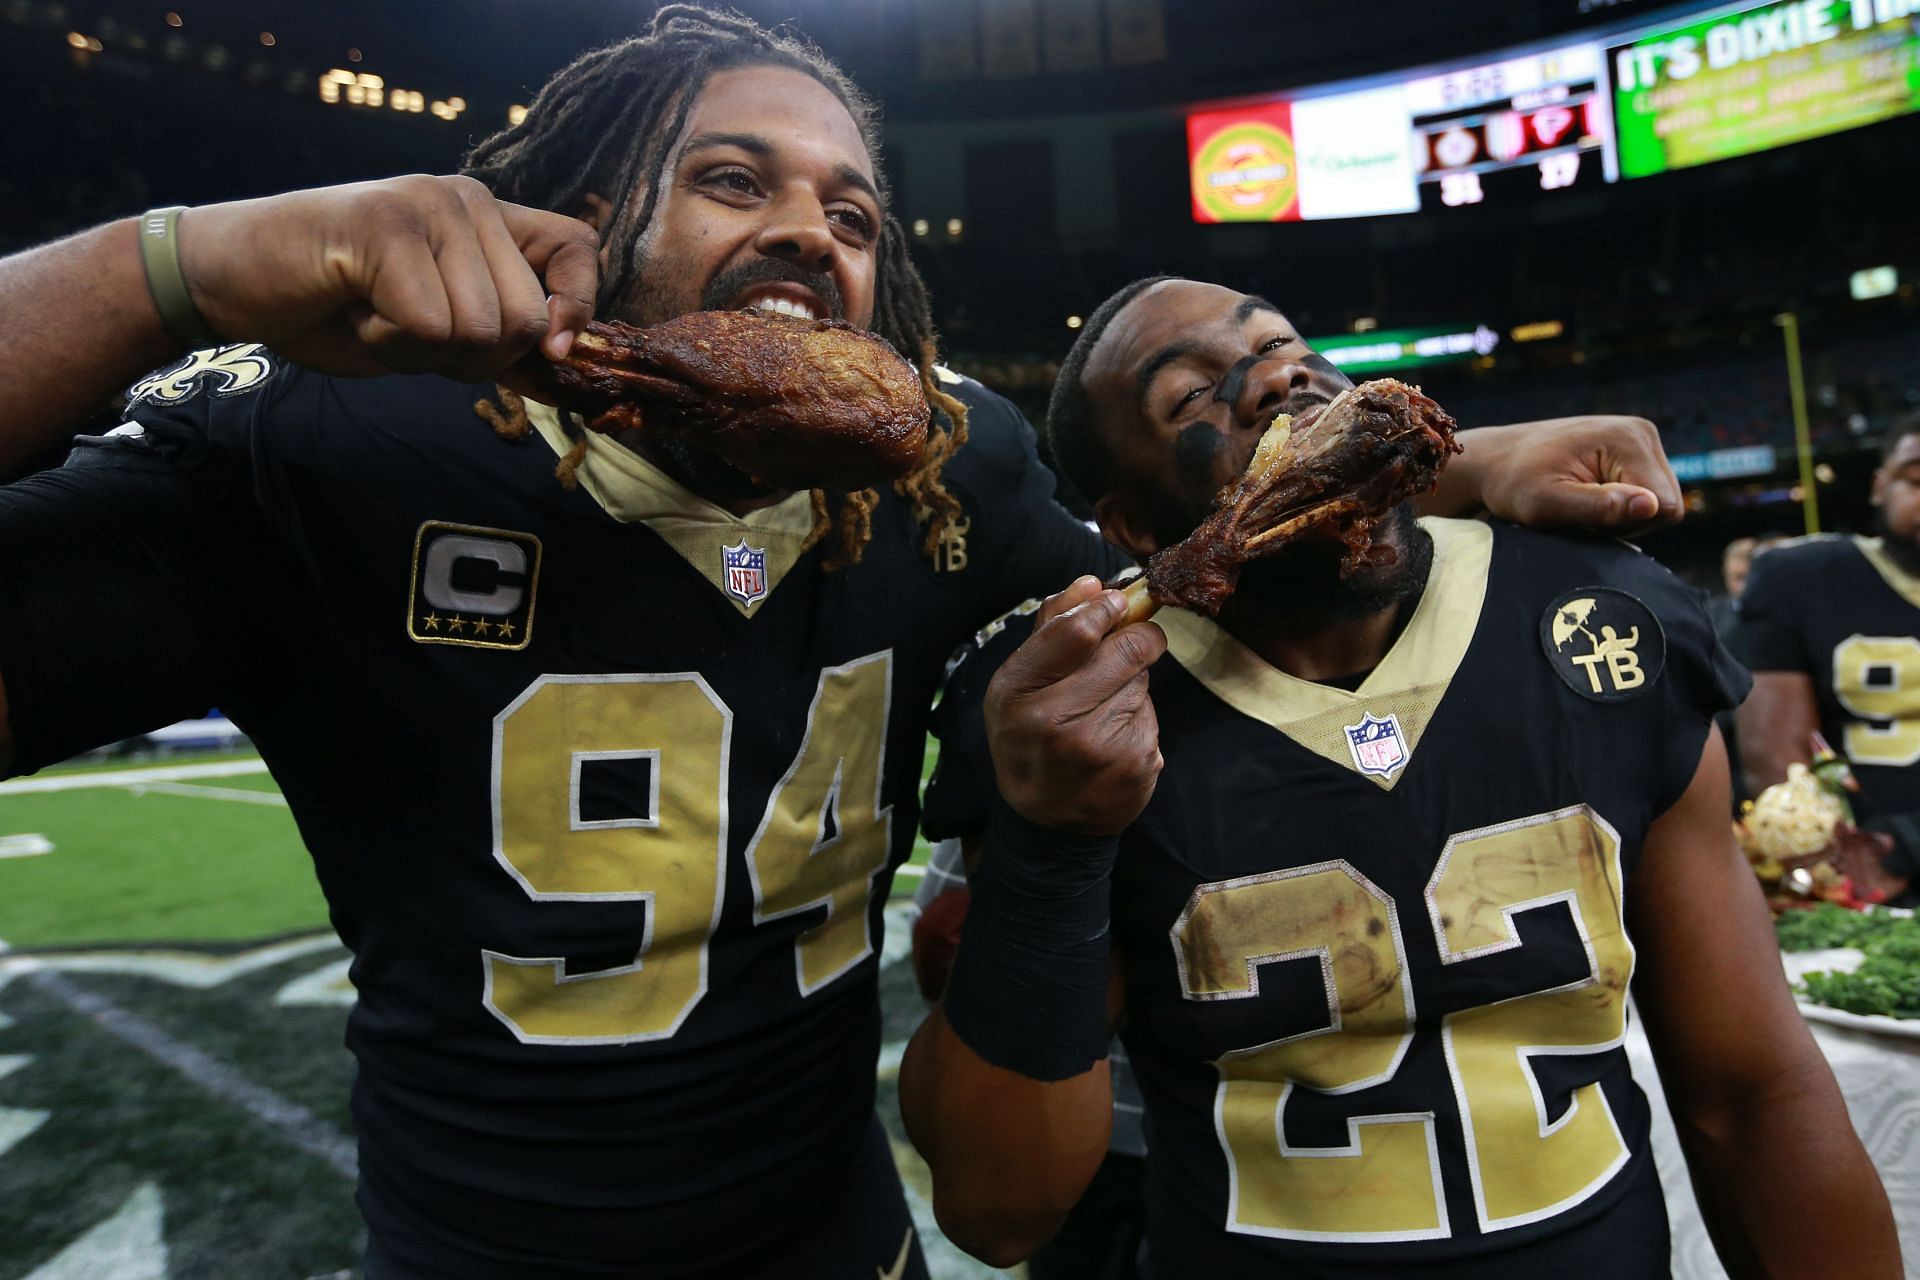 NFL stars will receive bizarre prizes for Thanksgiving games as